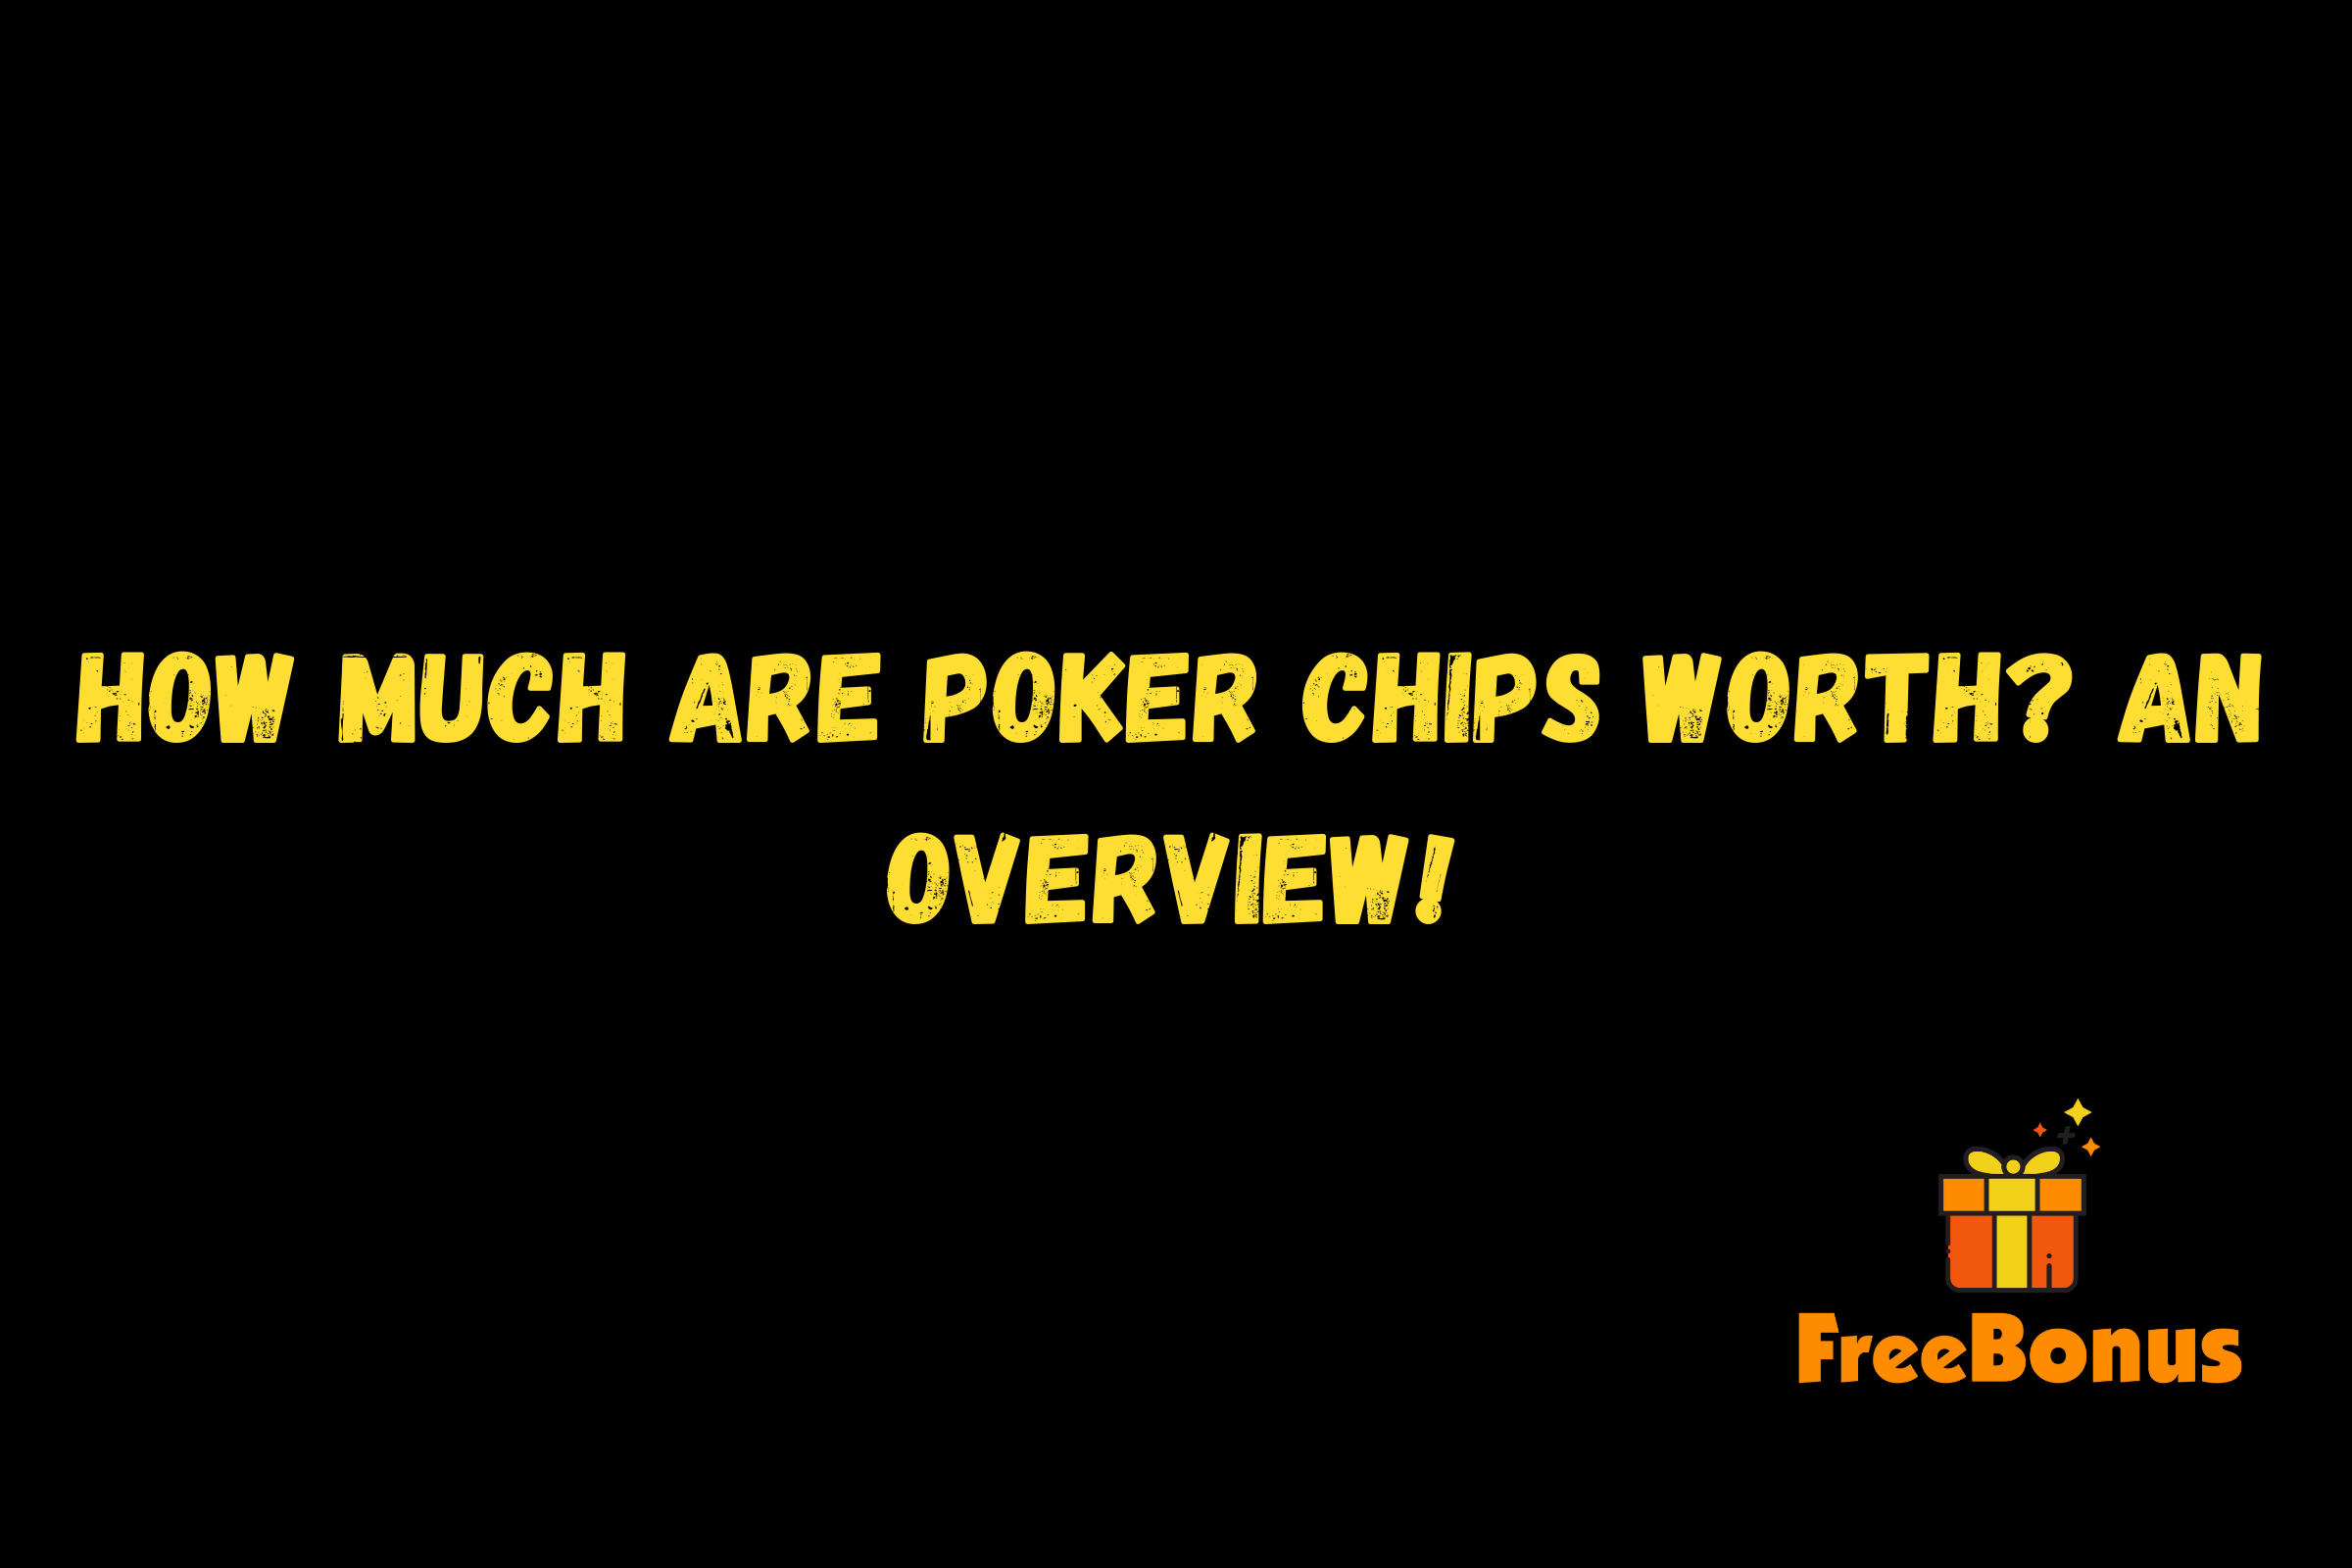 How Much Are Poker Chips Worth? An Overview!